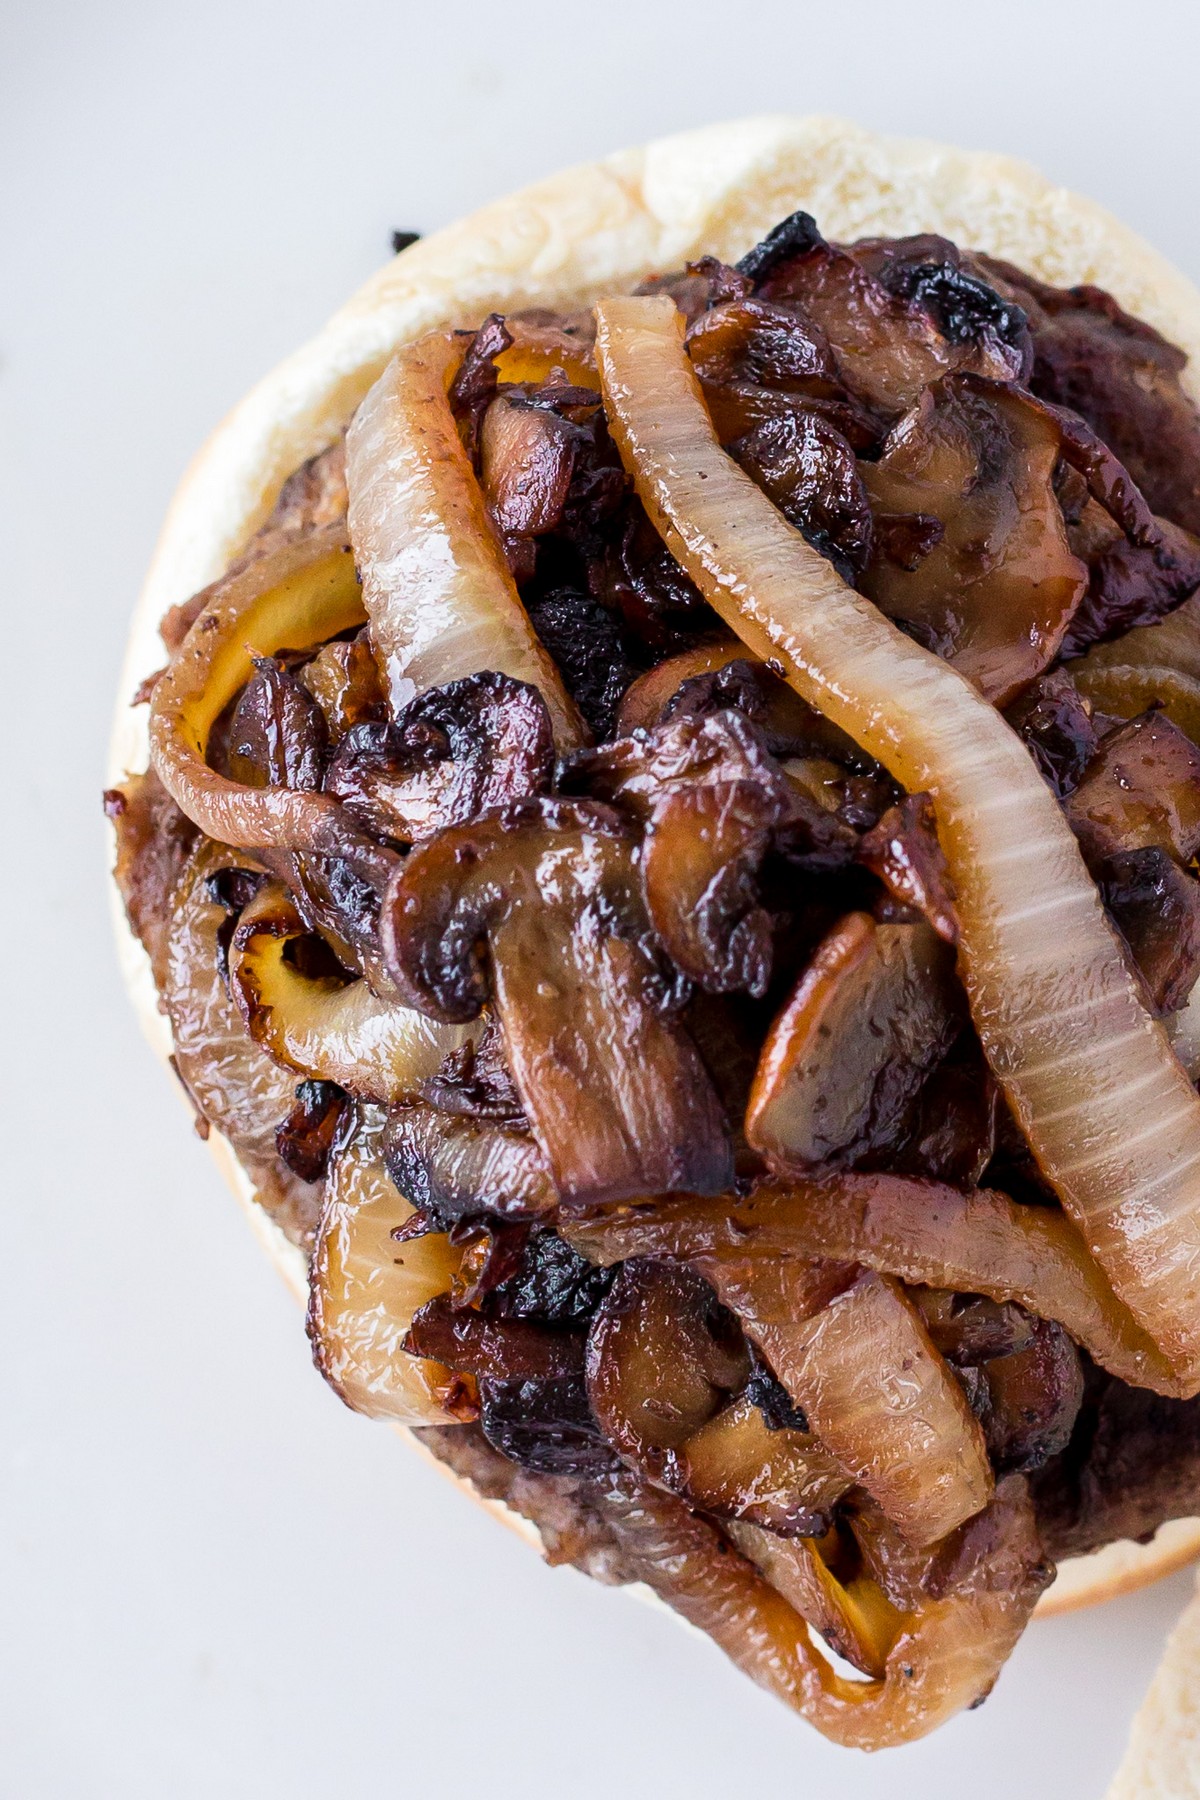 caramelized onions and mushrooms as a topping